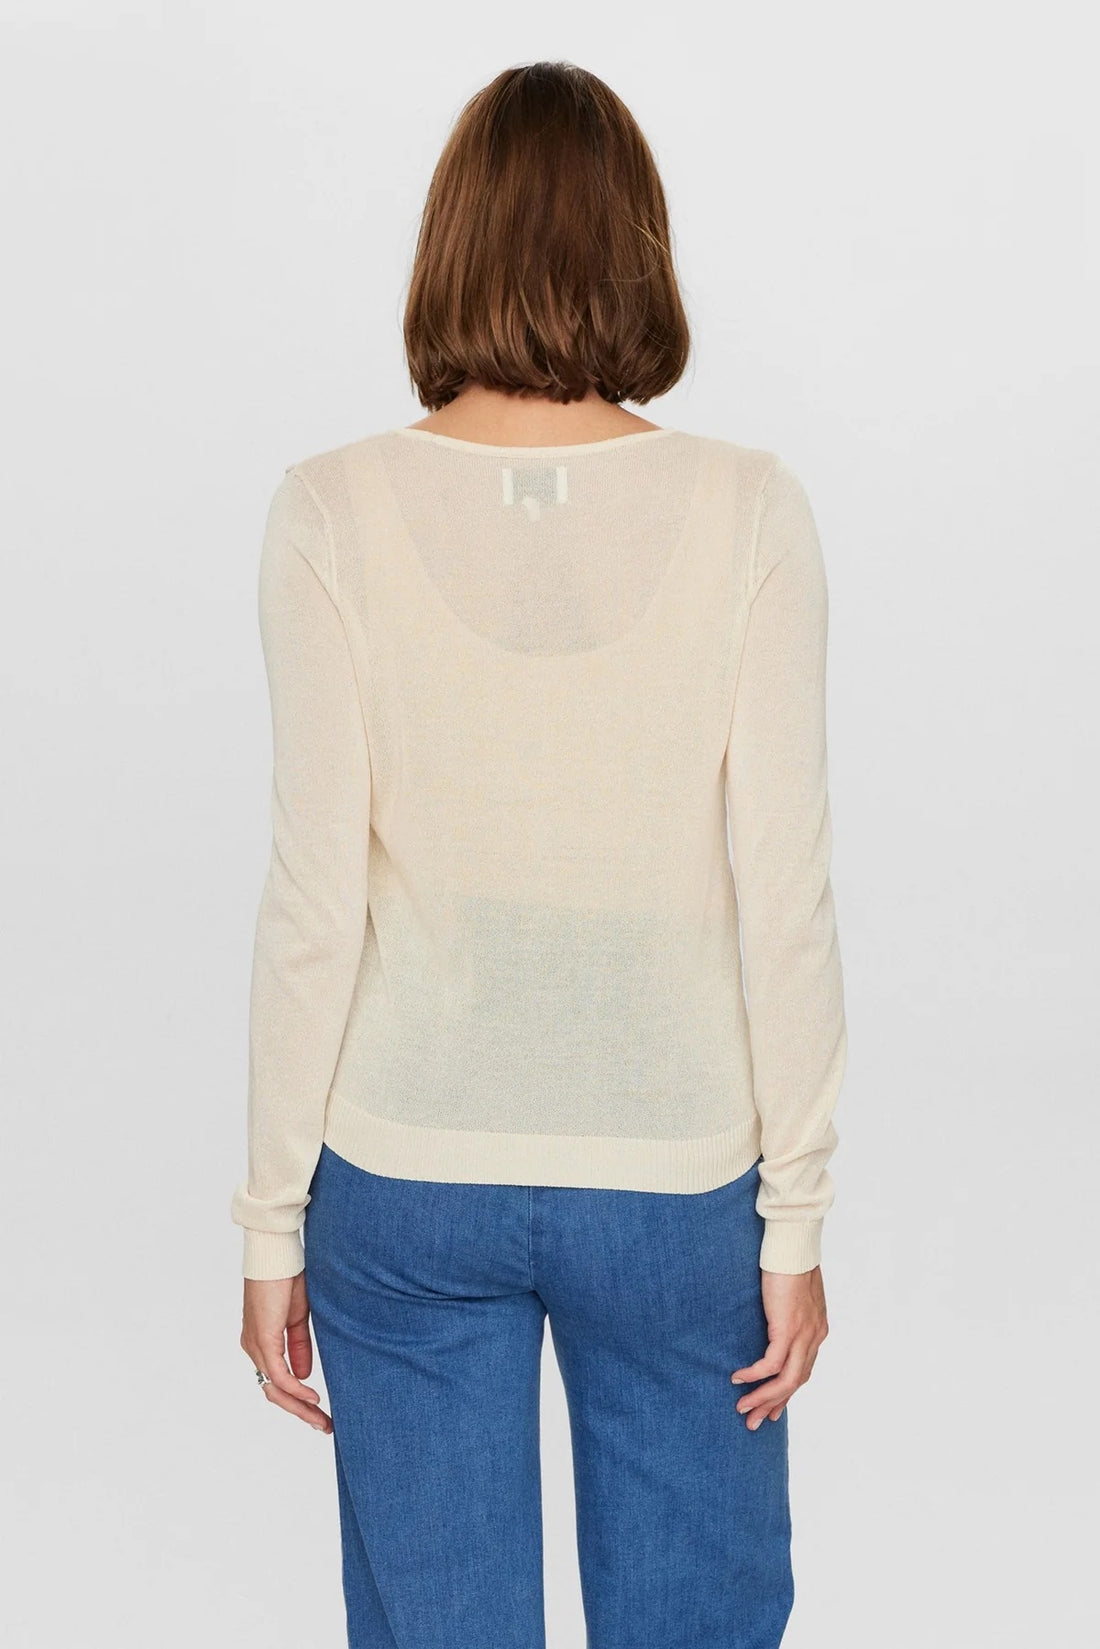 Numph Nulana Pullover in Sandshell